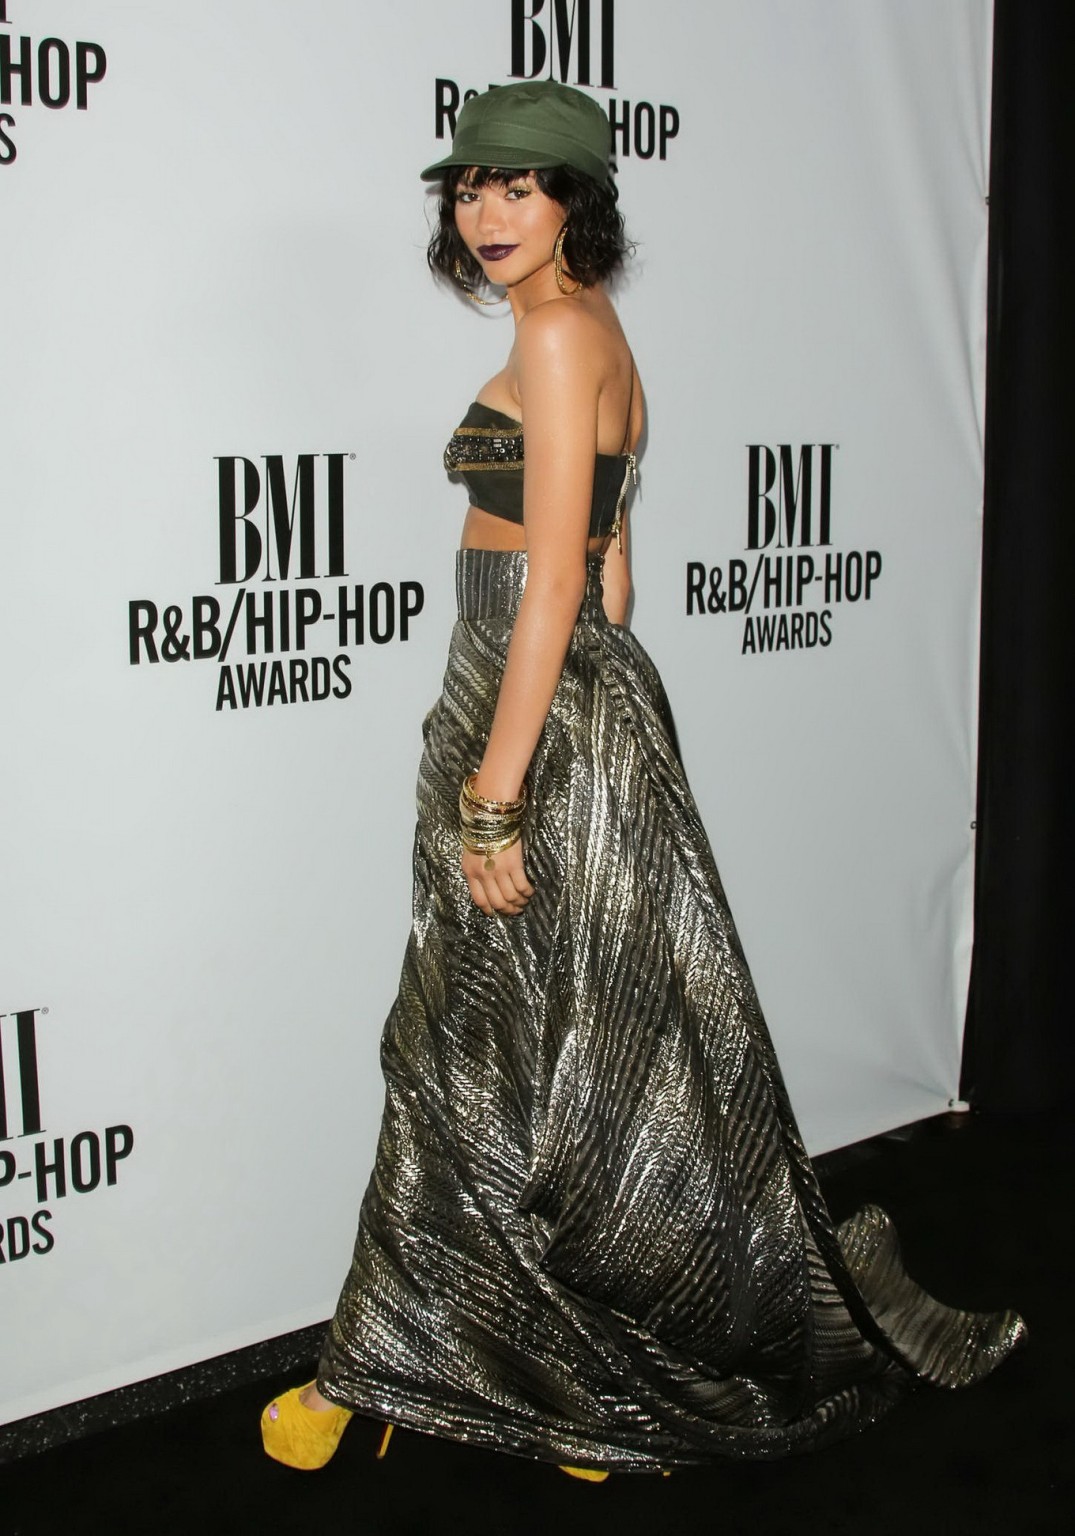 Zendaya Coleman shows off her boobs in a tiny belly top at BMI RB Hip Hop Awards #75187589